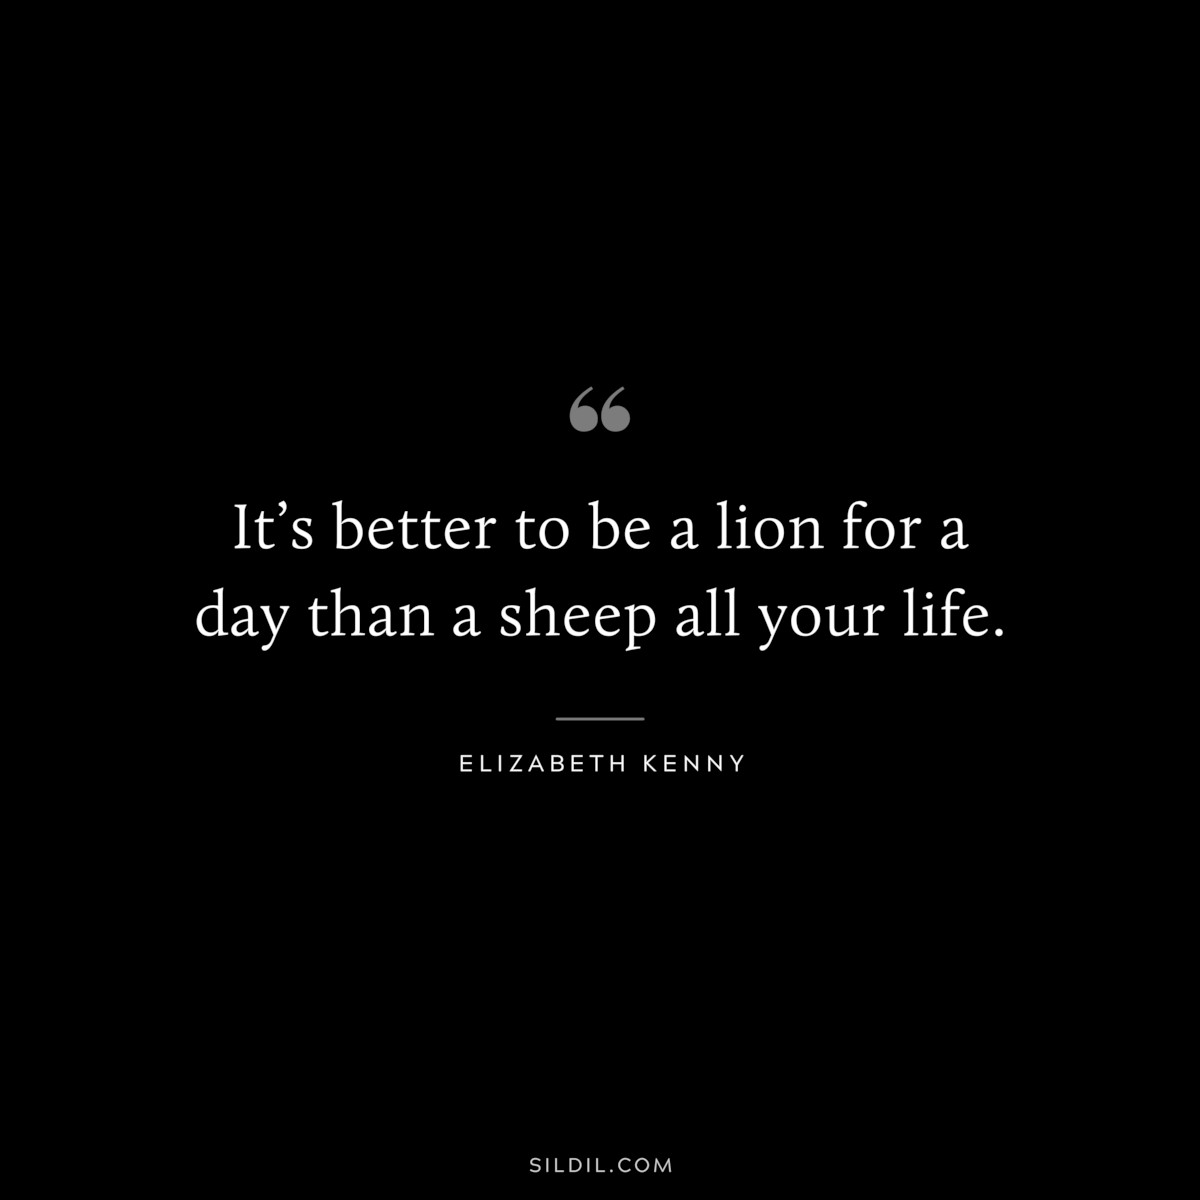 It’s better to be a lion for a day than a sheep all your life. ― Elizabeth Kenny